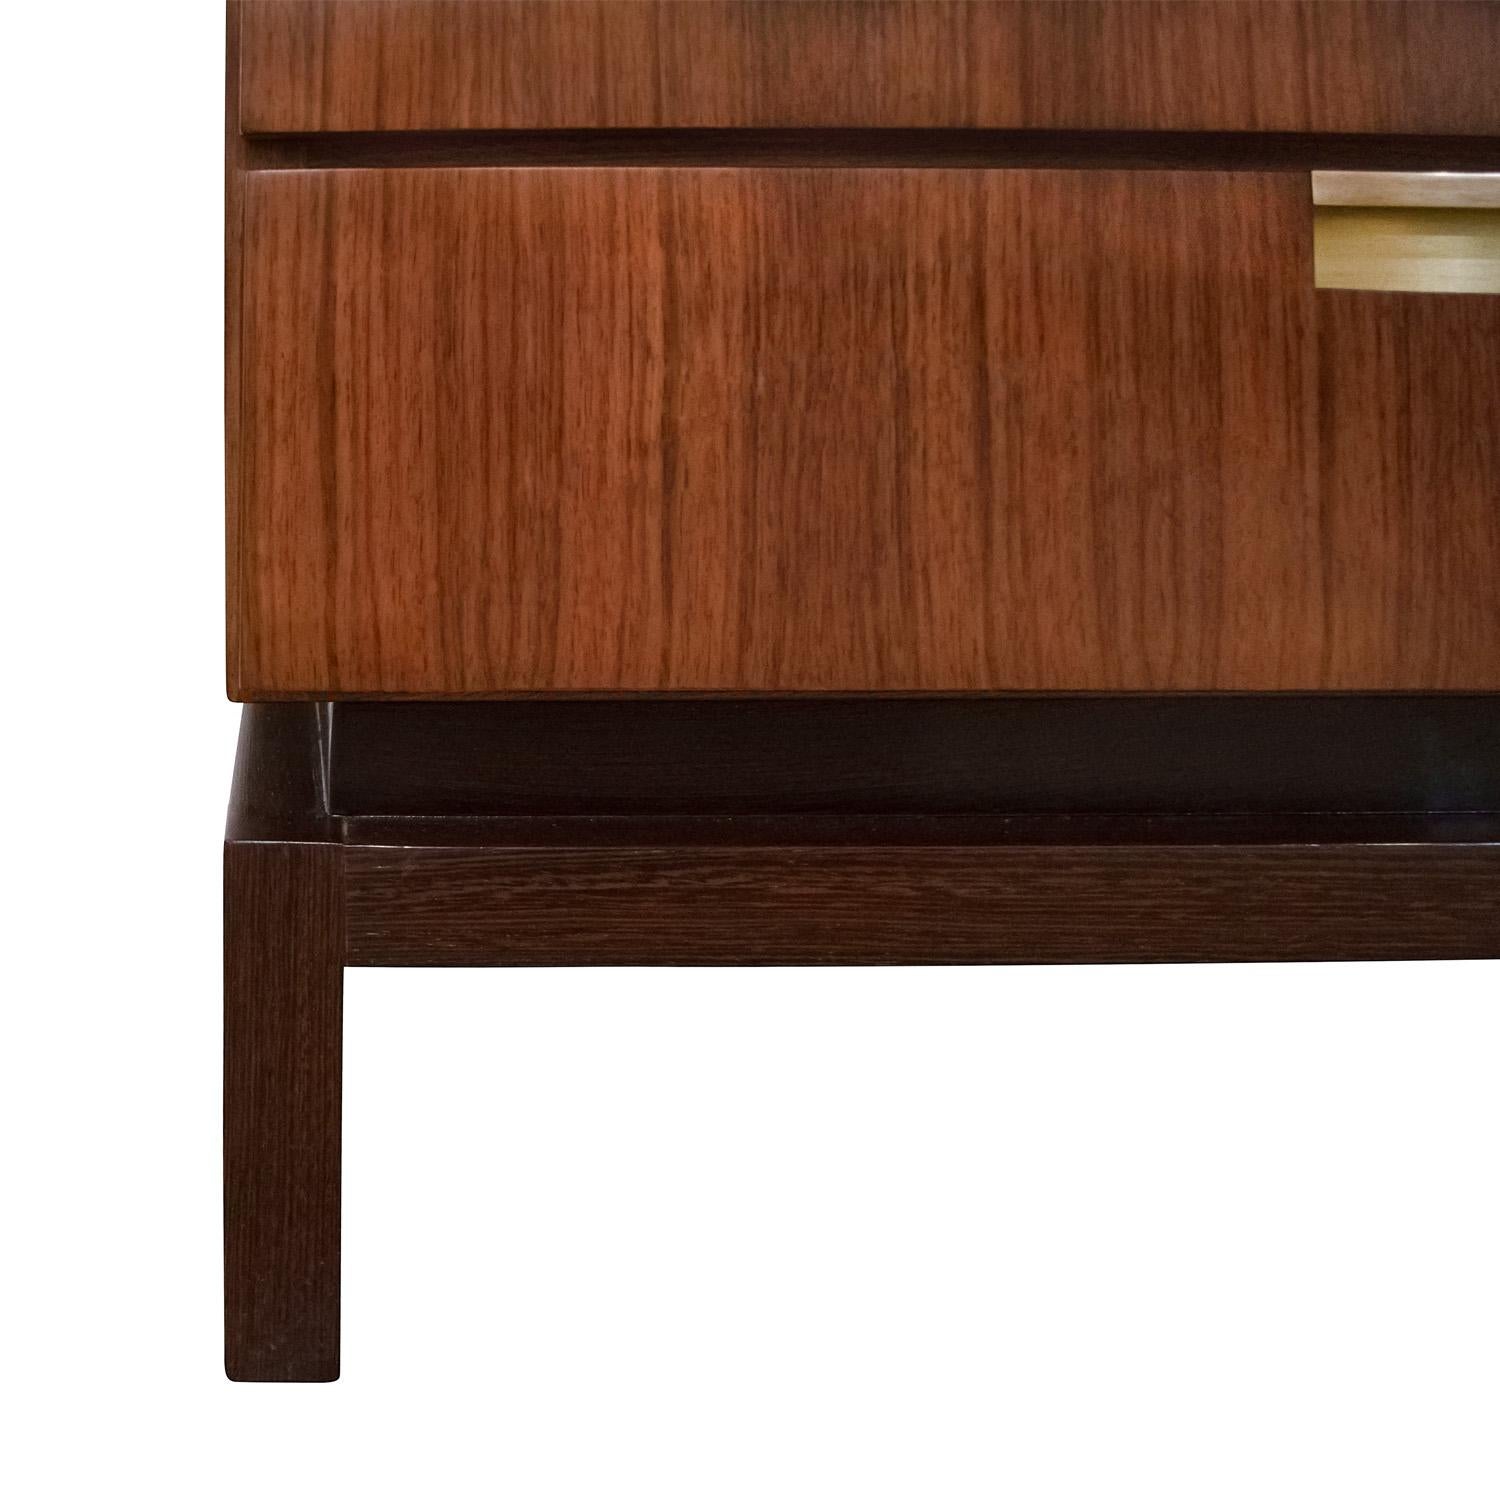 Mid-20th Century De Coene Frères Beautifully Tailored Chest of Drawers with Built-In Vanity 1960s For Sale